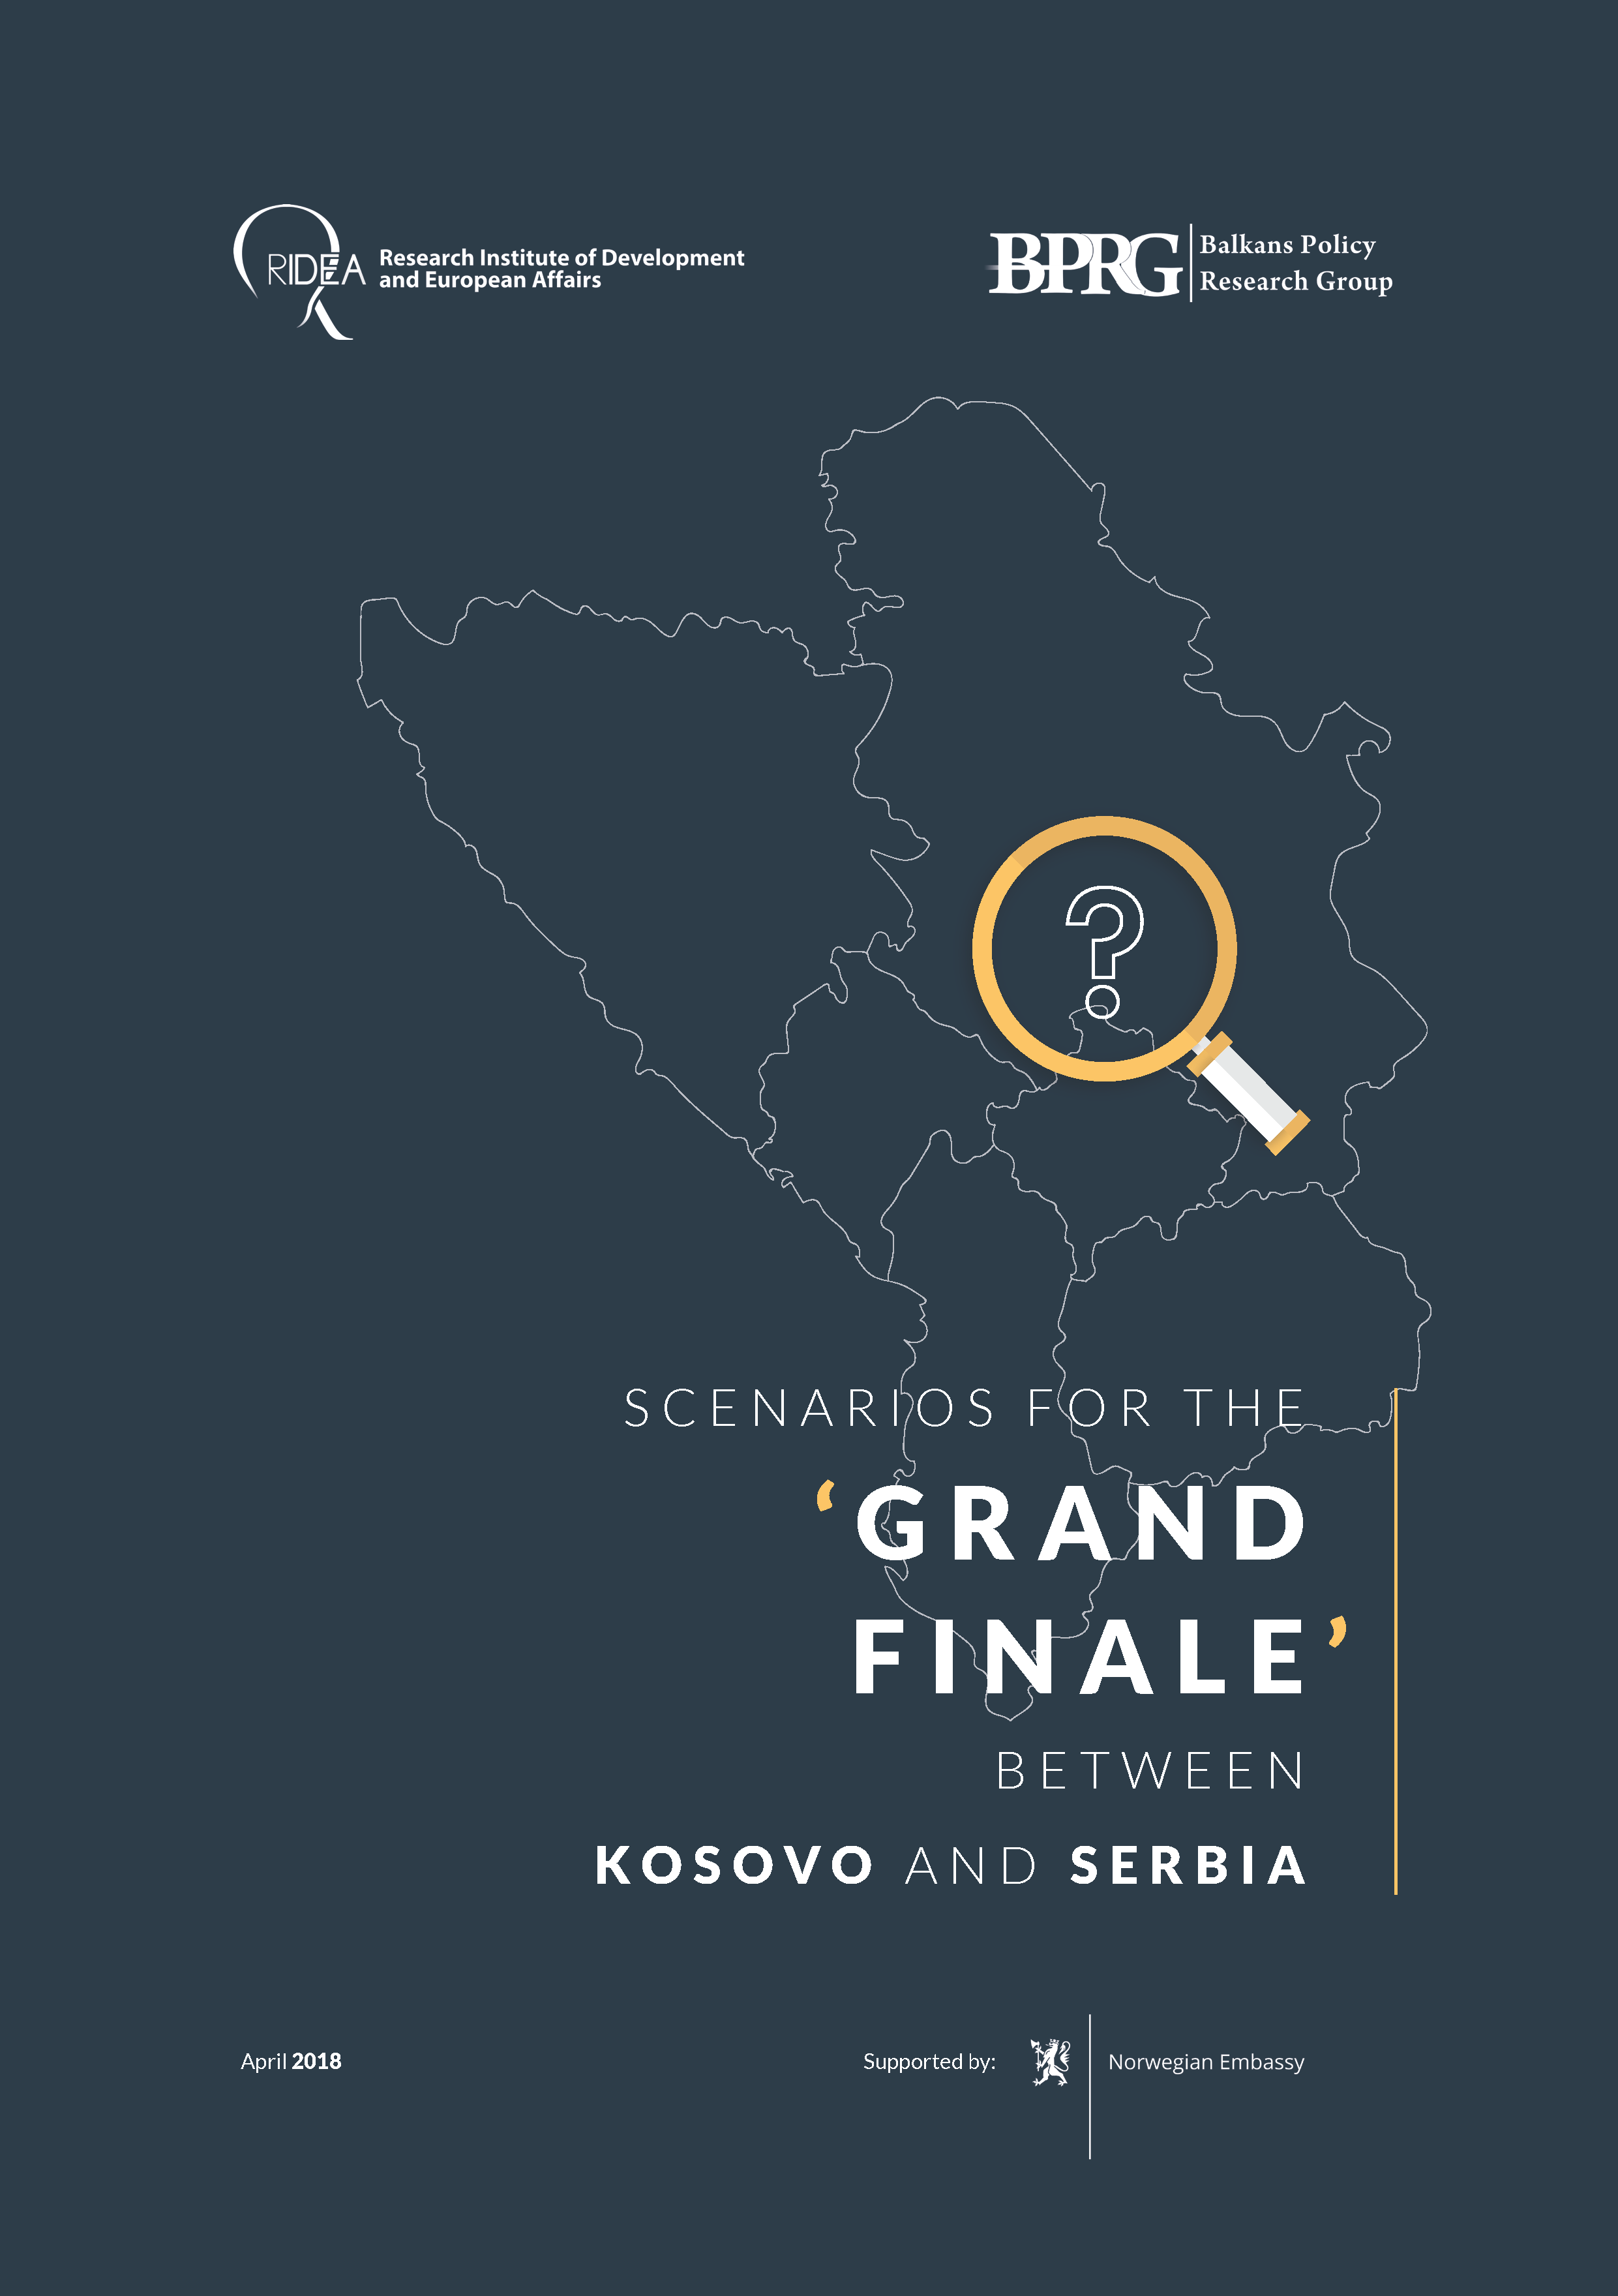 Scenarios for the Grand Finale between Kosovo and Serbia